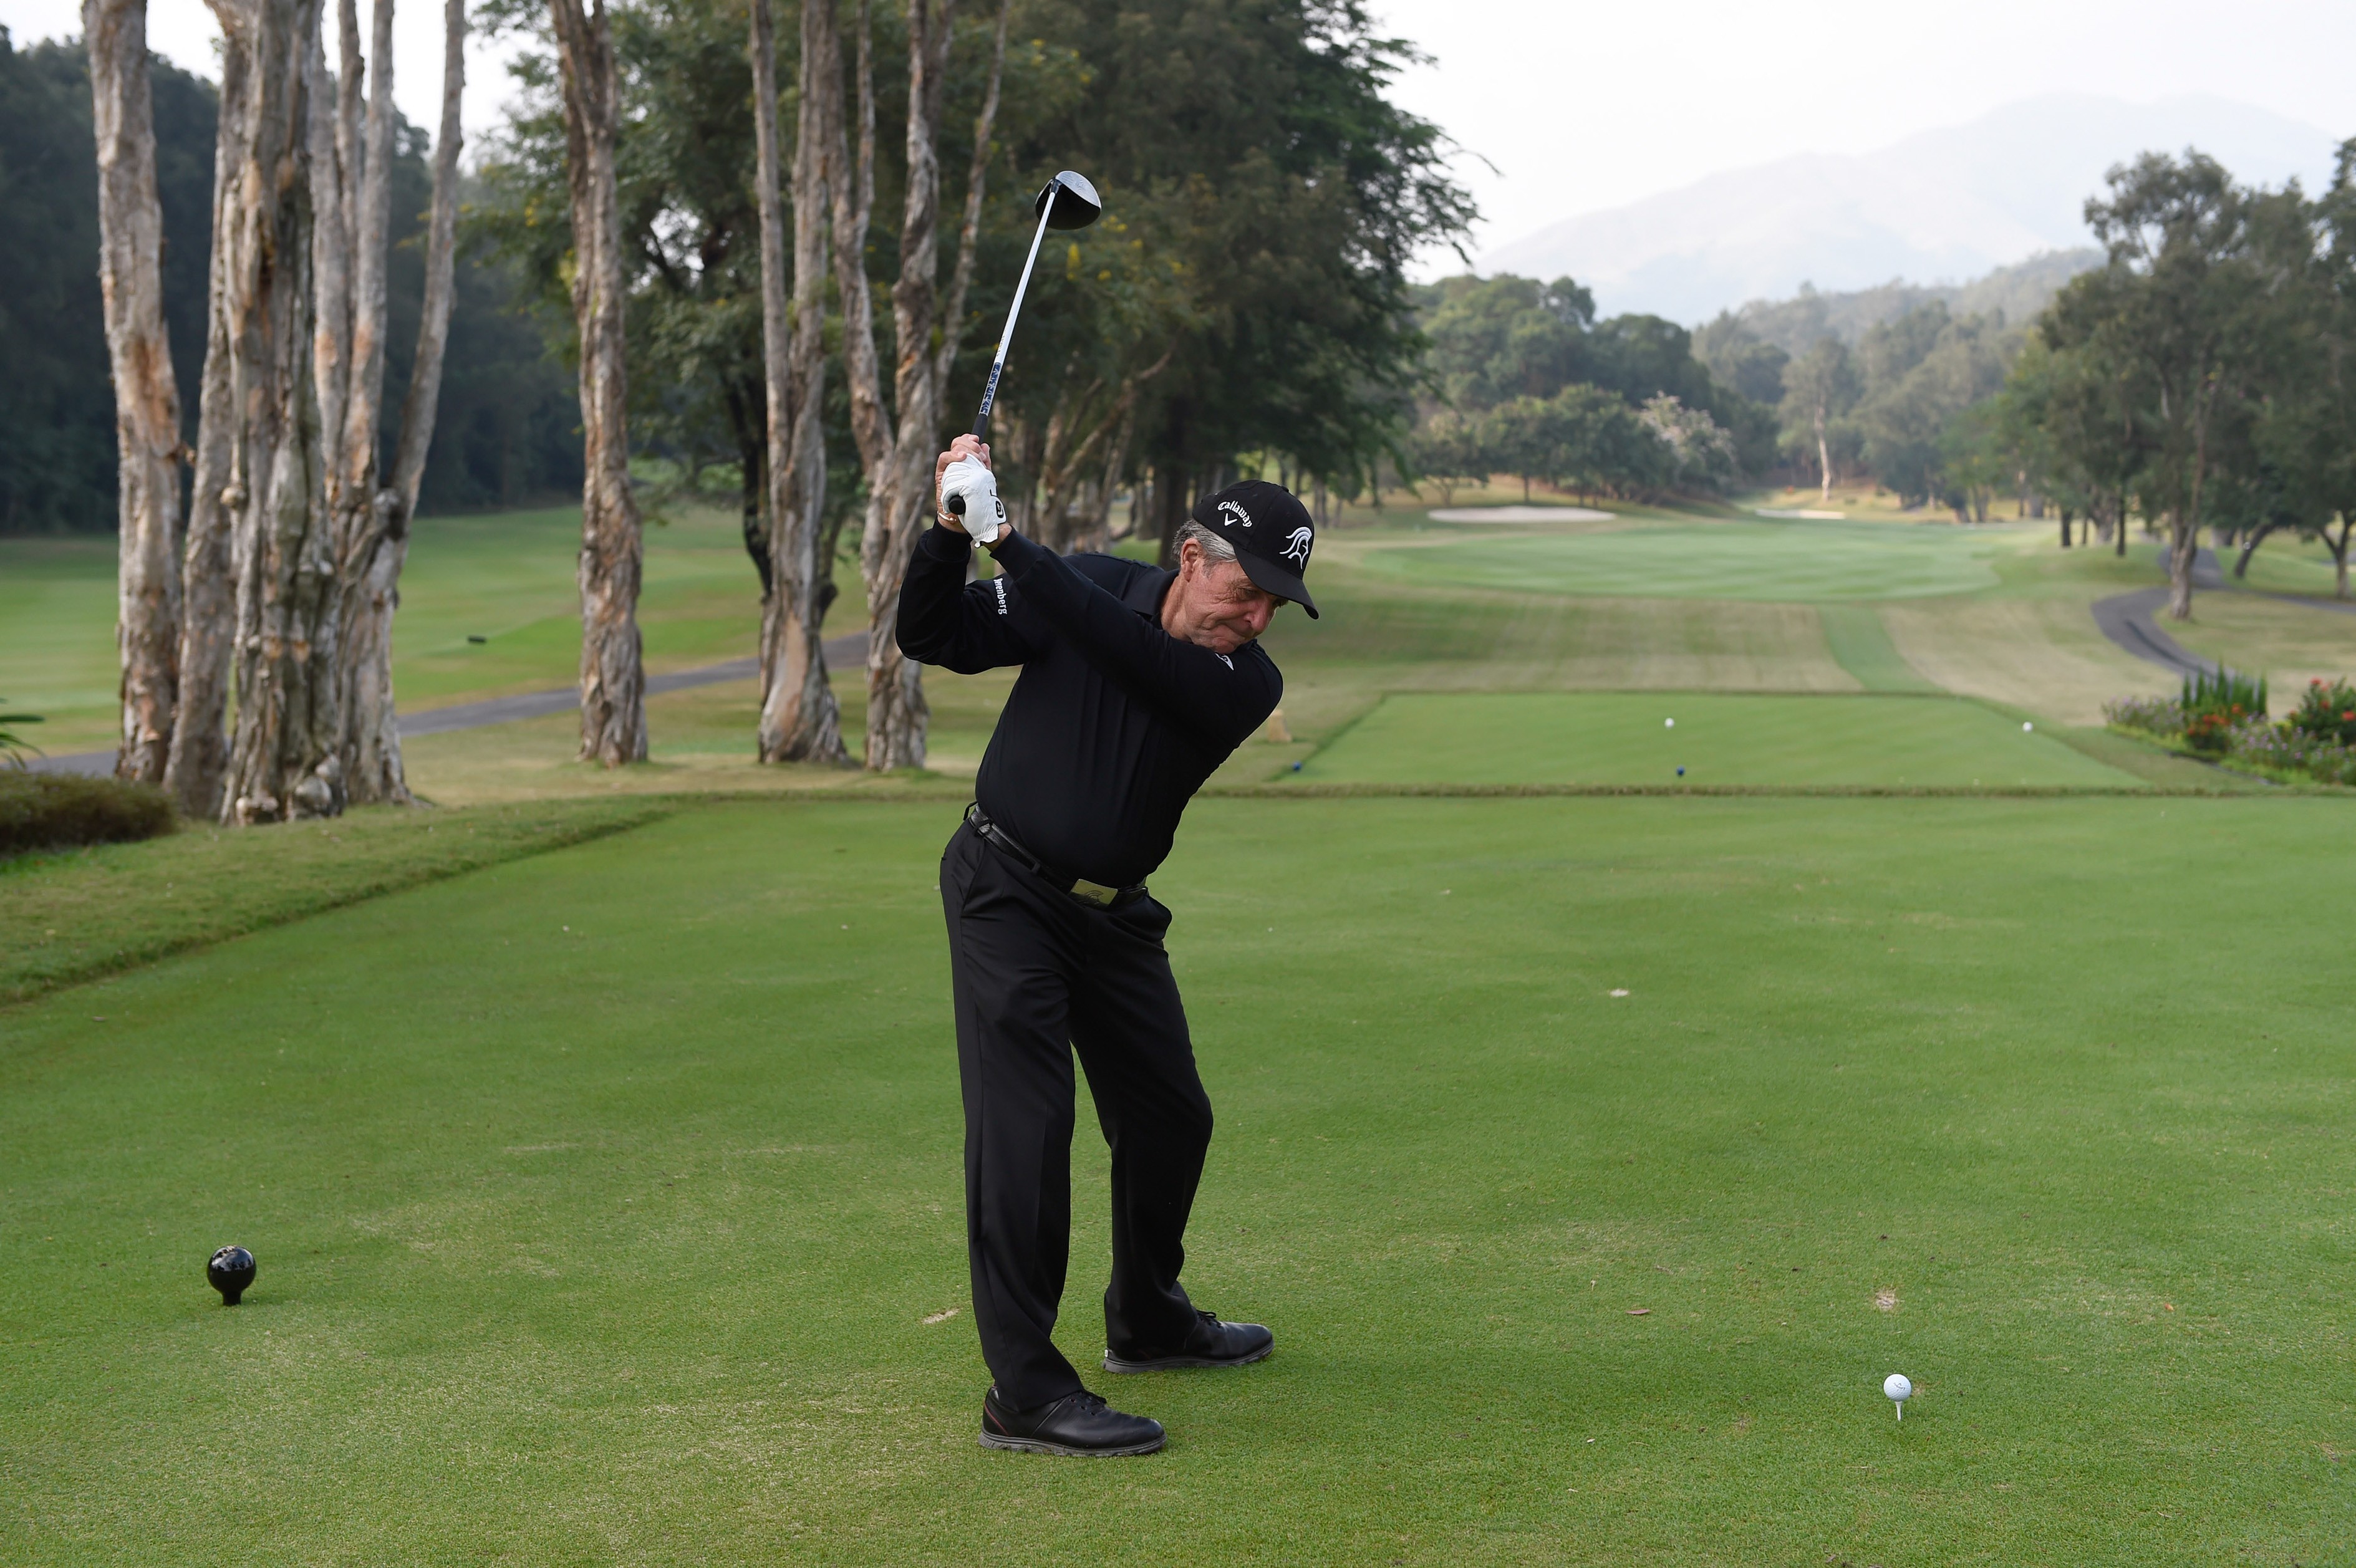 South African legend Gary Player tees off on the first hole of the Eden Course at Hong Kong Golf Club. The hole is also the first on the Composite Course used for the Hong Kong Open. Photo: Richard Castka/Sportpixgolf.com.